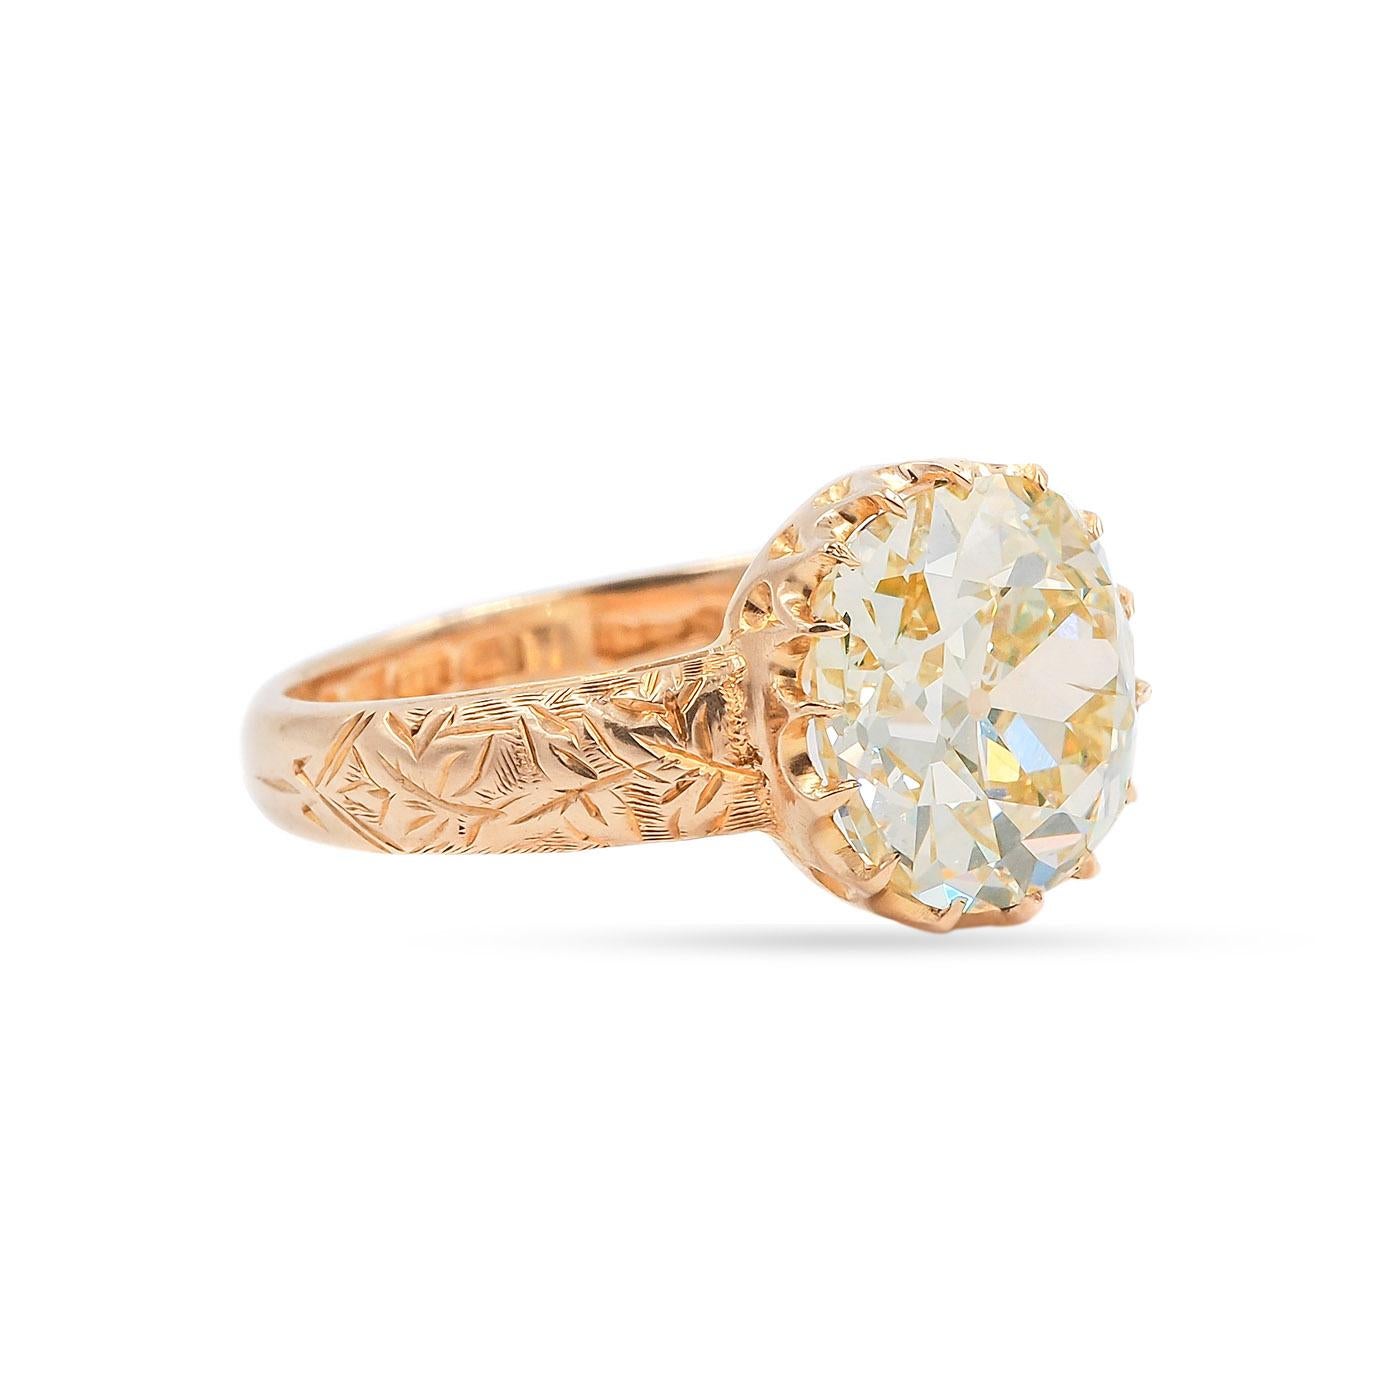 A Late Victorian era Solitaire Engagement Ring in bright & buttery 18k yellow gold. Featuring a rare 4.50 Carat Old Mine Cut Diamond. GIA certified Natural Fancy Yellow color/SI2 clarity. Diamond is a slightly elongated cushion-shape and is set in a